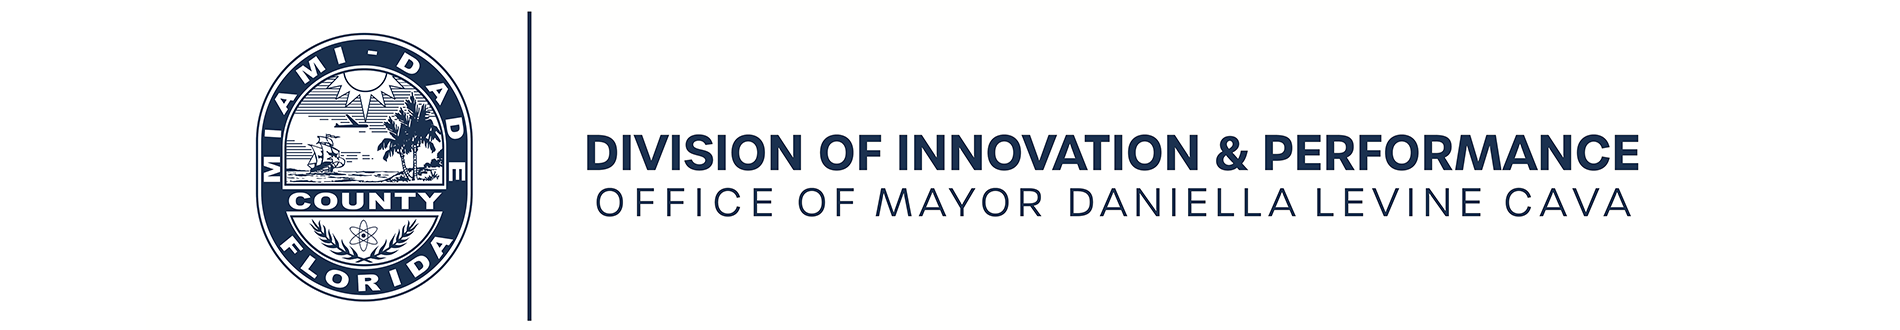 Office of Mayor Daniella Levine Cava, Division of Innovation and Performance